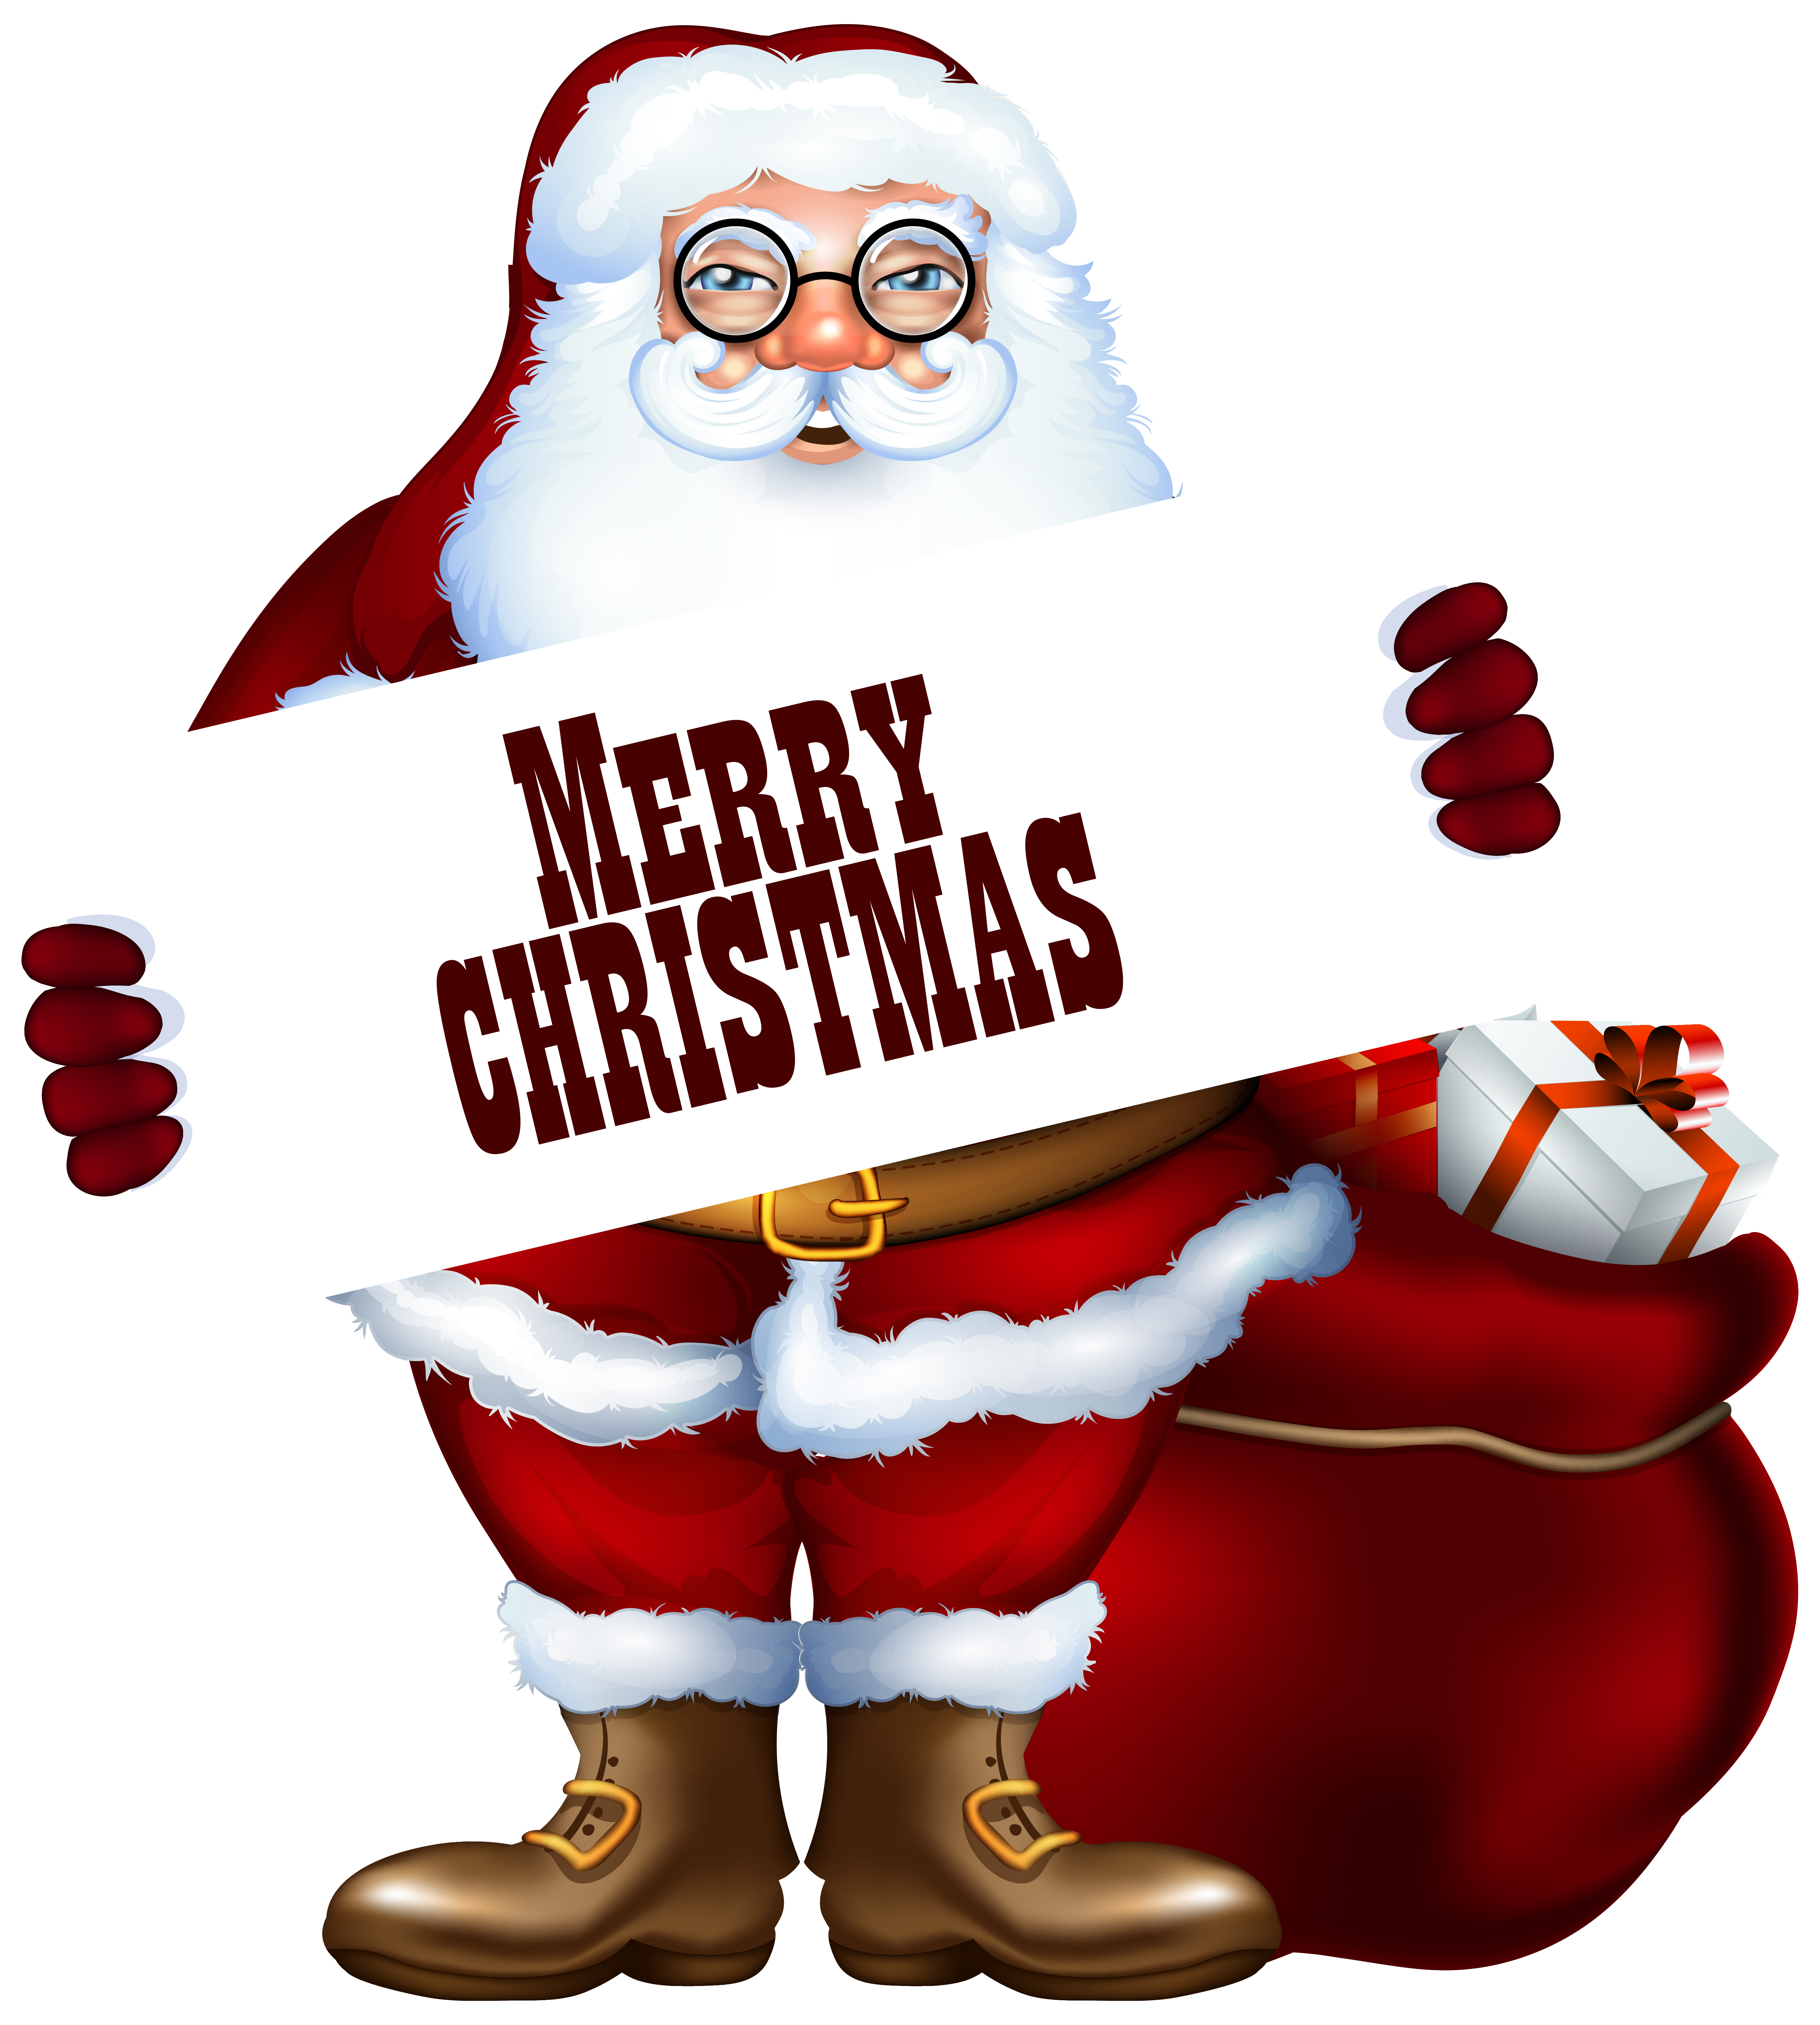 Santa Claus With Merry Christmas Label PNG Clipart Image Quality Image And Transparent PNG Free Clipart